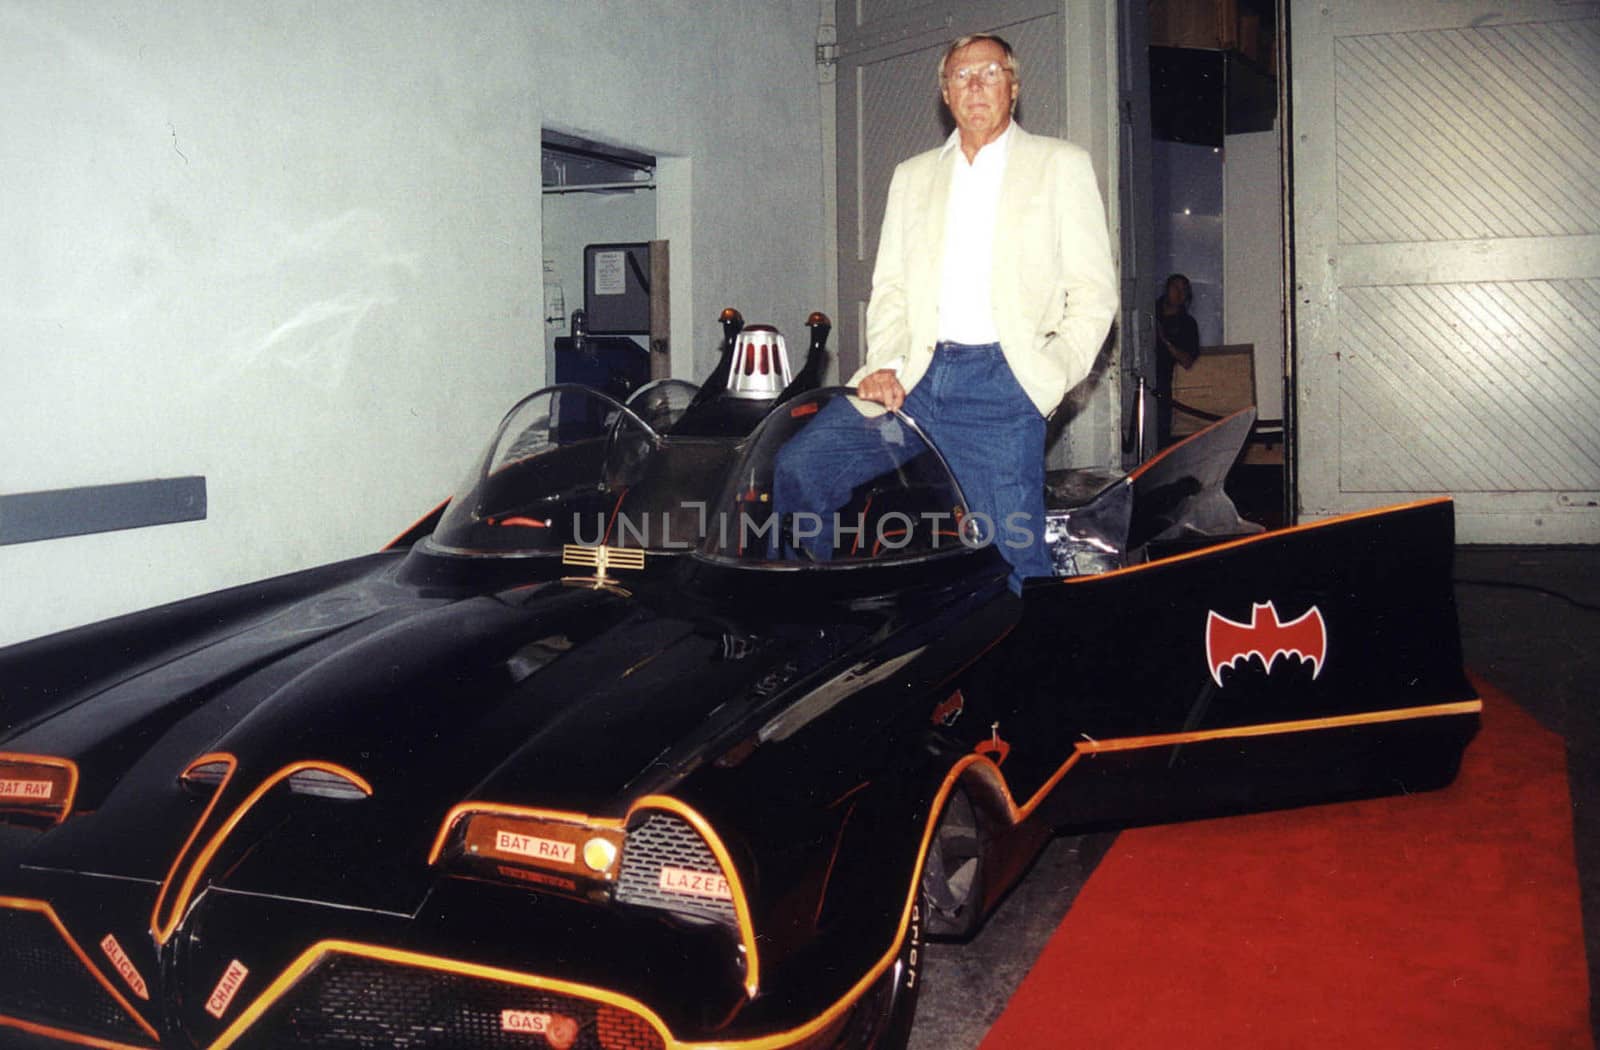 ADAM WEST on the set of "The Man Show" in Hollywood, 06-21-01 on the set of "The Man Show" in Hollywood, 06-01-01